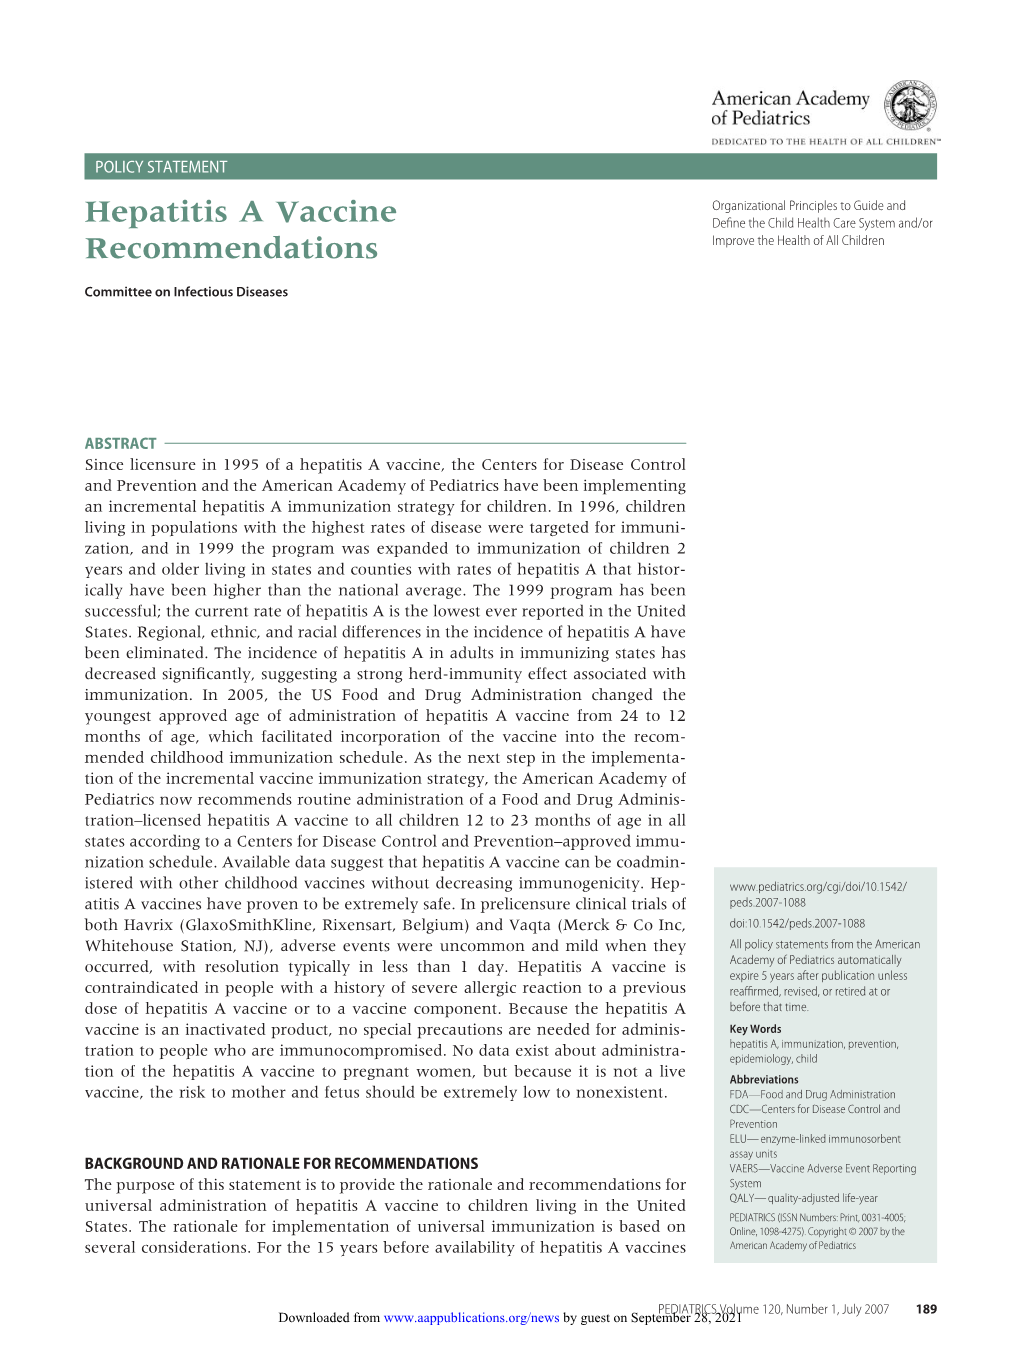 Hepatitis a Vaccine Recommendations Committee on Infectious Diseases Pediatrics 2007;120;189 DOI: 10.1542/Peds.2007-1088